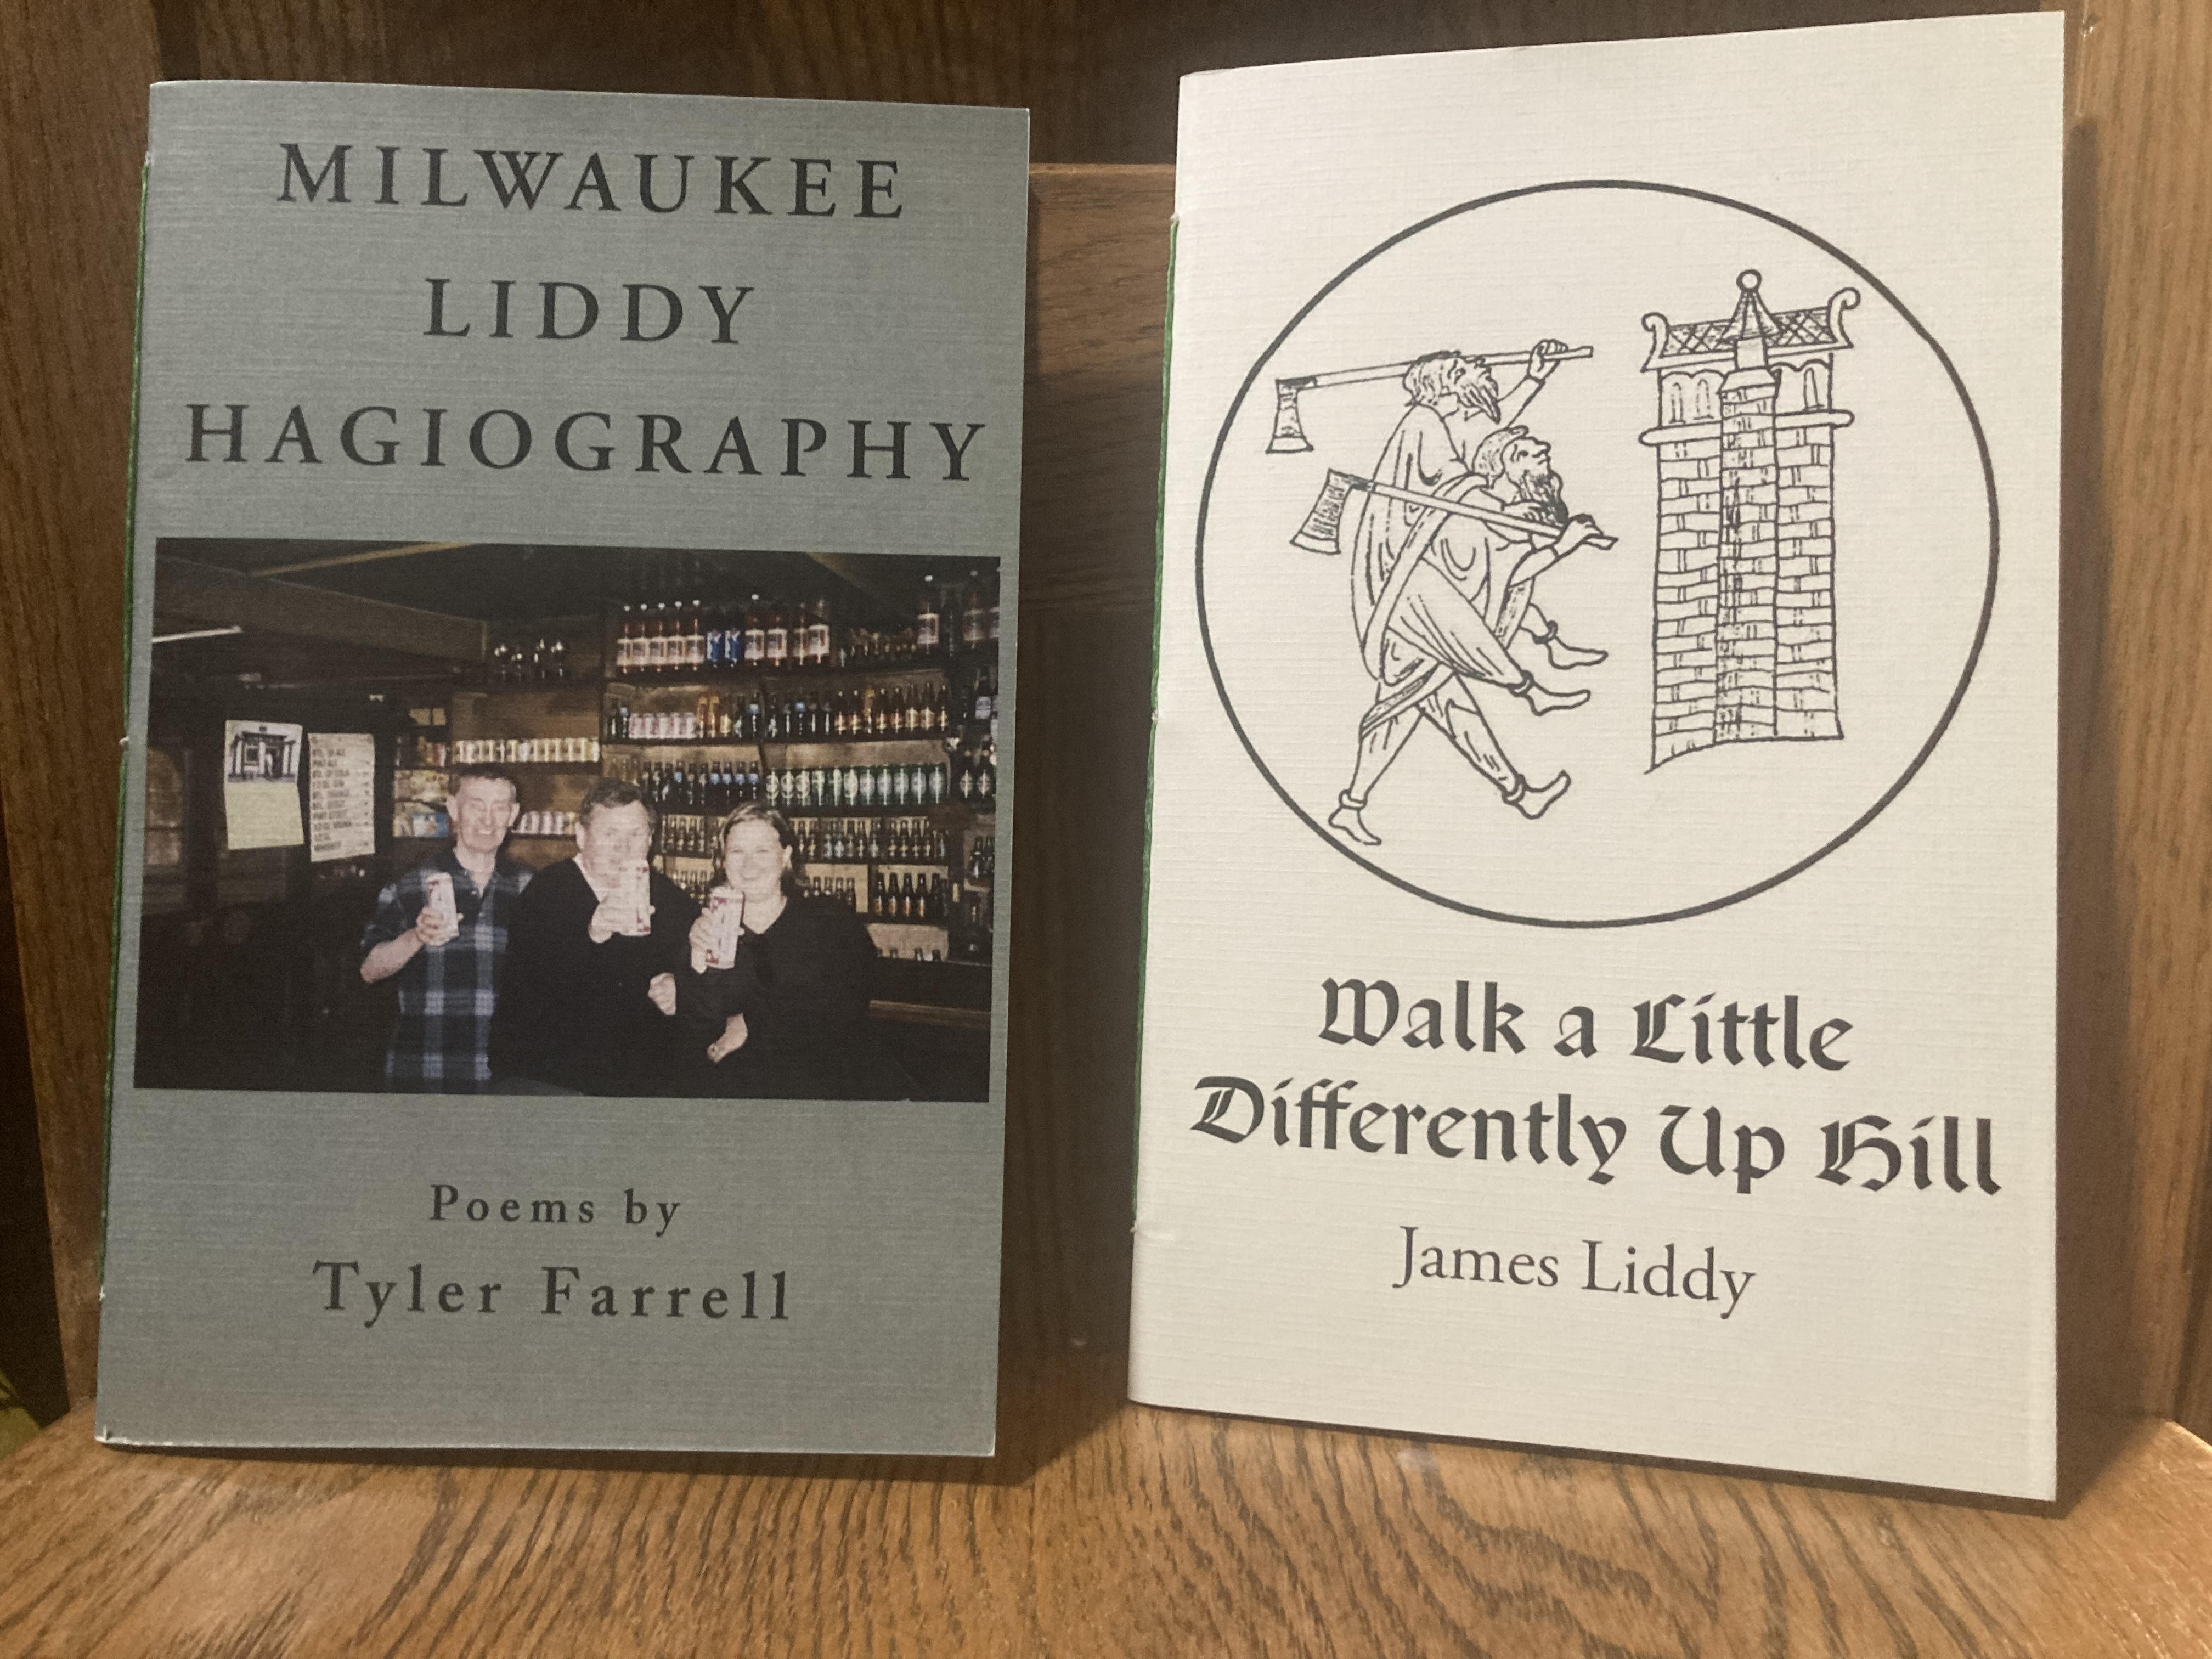 Book covers for Milwaukee Liddy Hagiography and Walk a Little Differently Up Hill